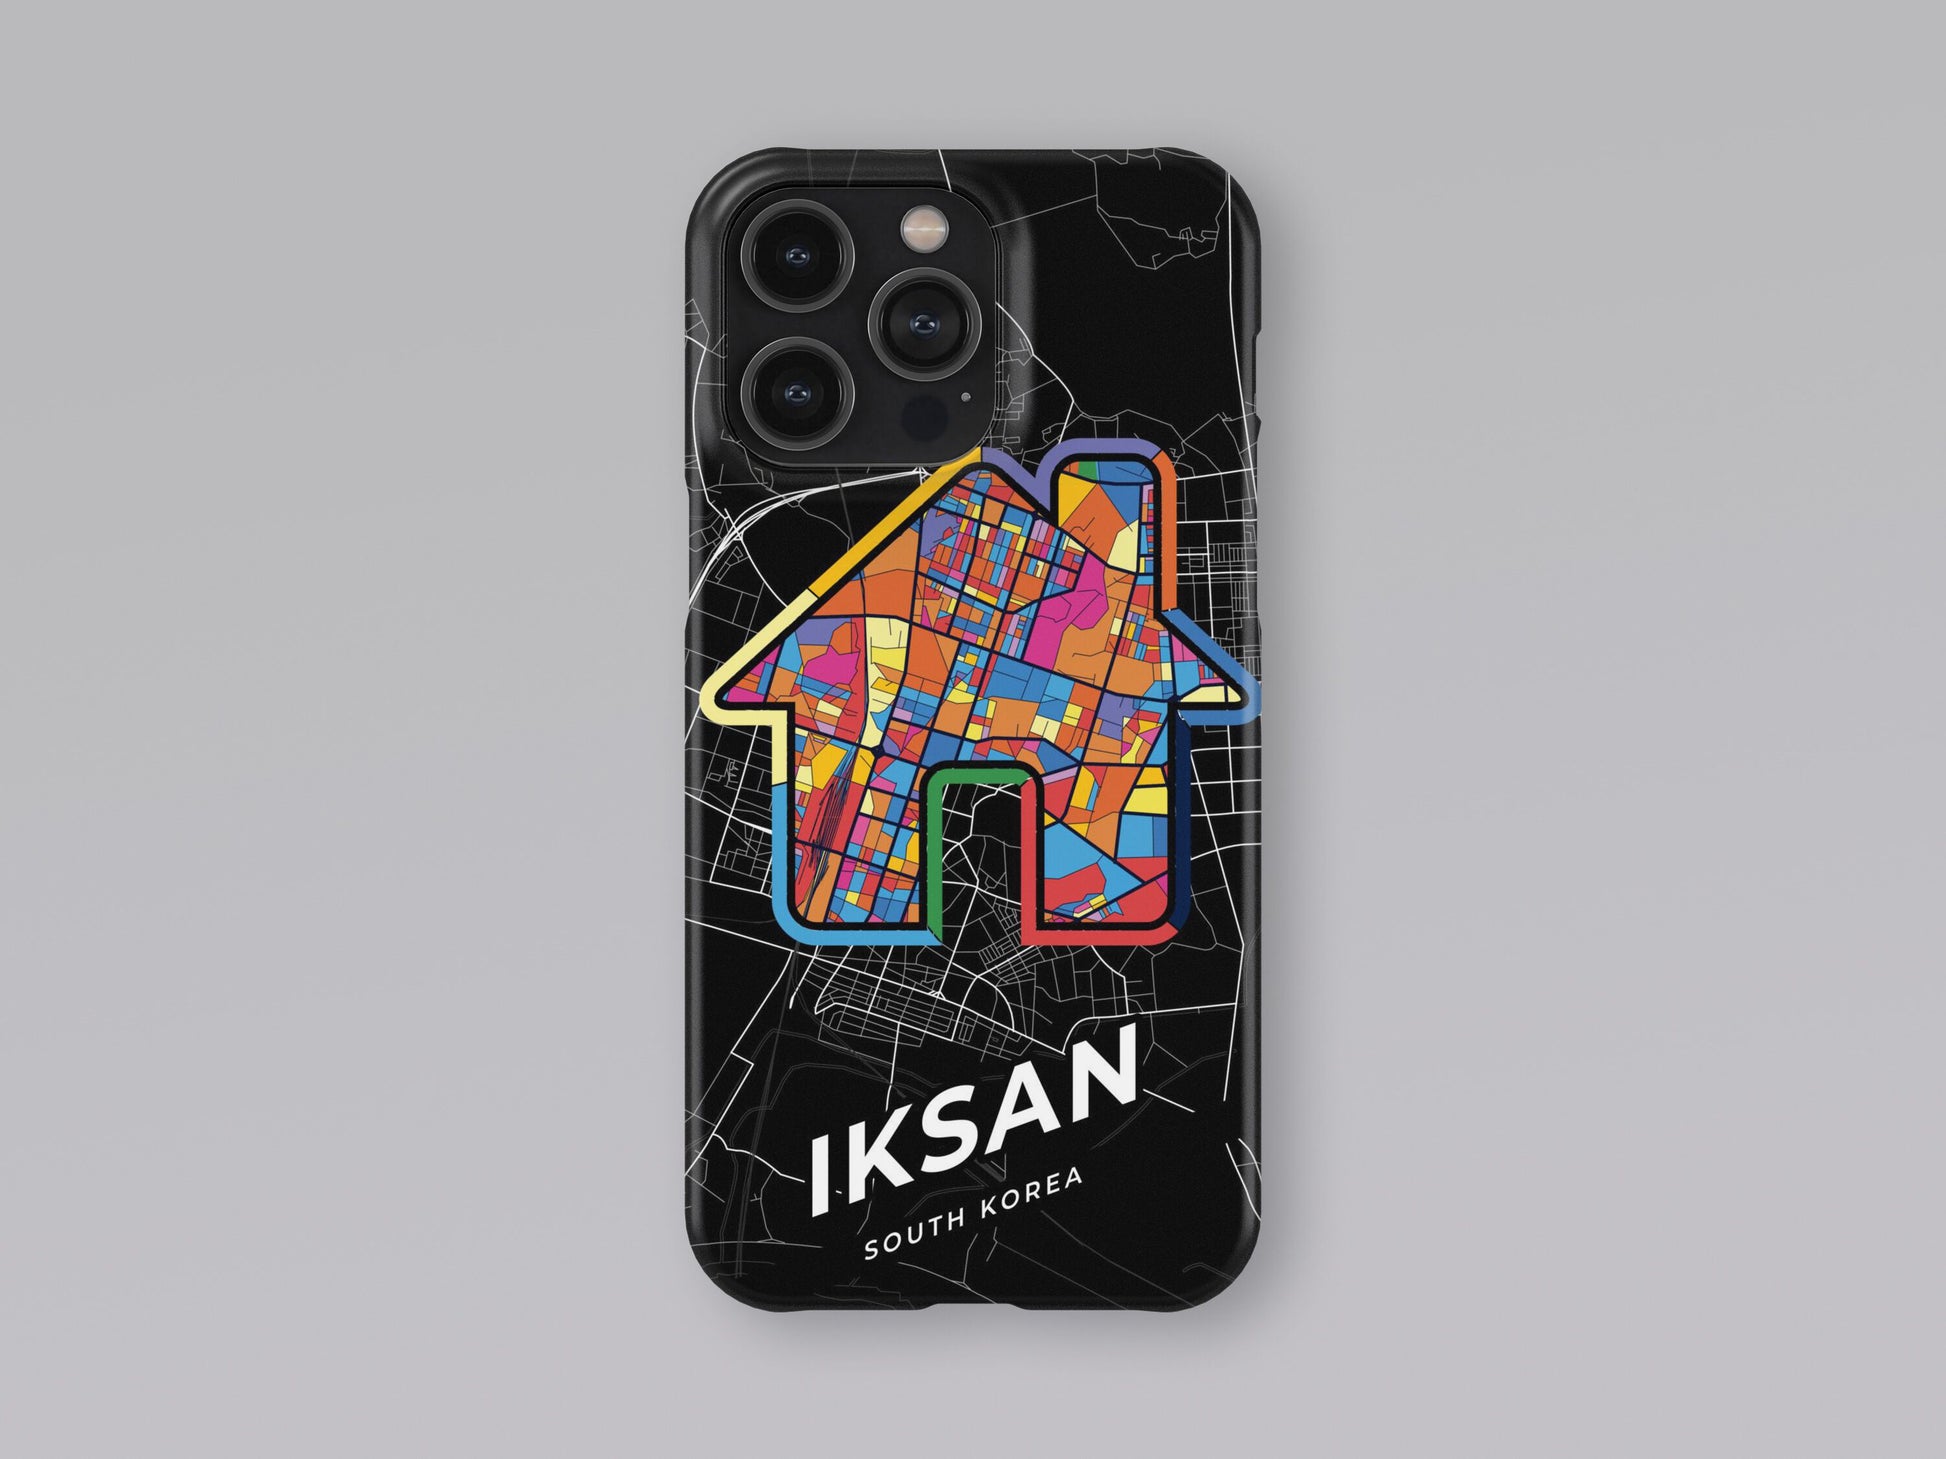 Iksan South Korea slim phone case with colorful icon. Birthday, wedding or housewarming gift. Couple match cases. 3